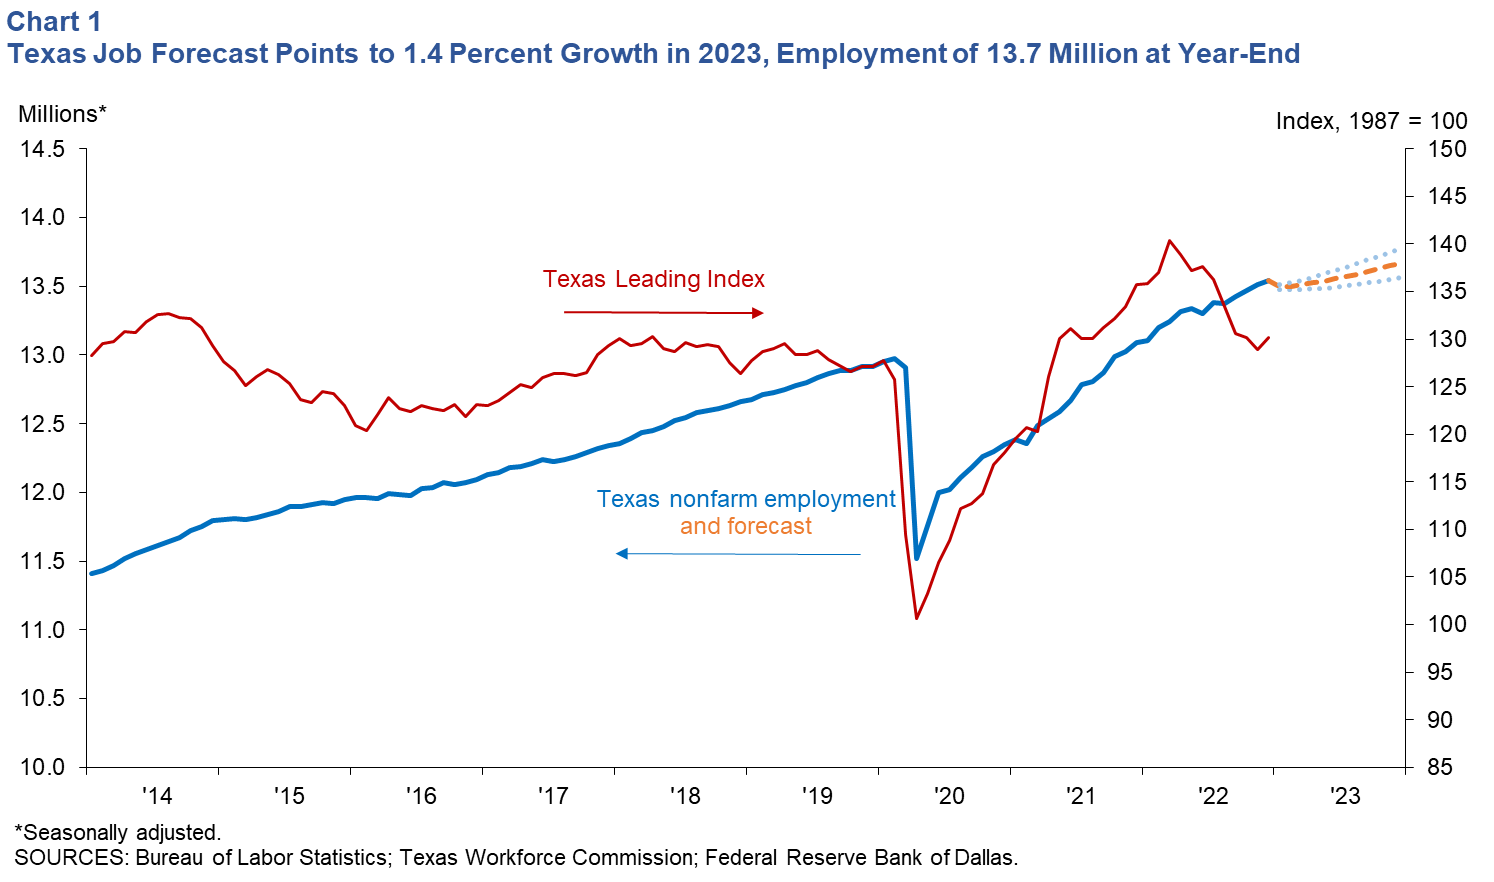 Texas Job Forecast Predicts 3.5 Percent Growth in 2022, Employment of 13.5 Million at Year-End